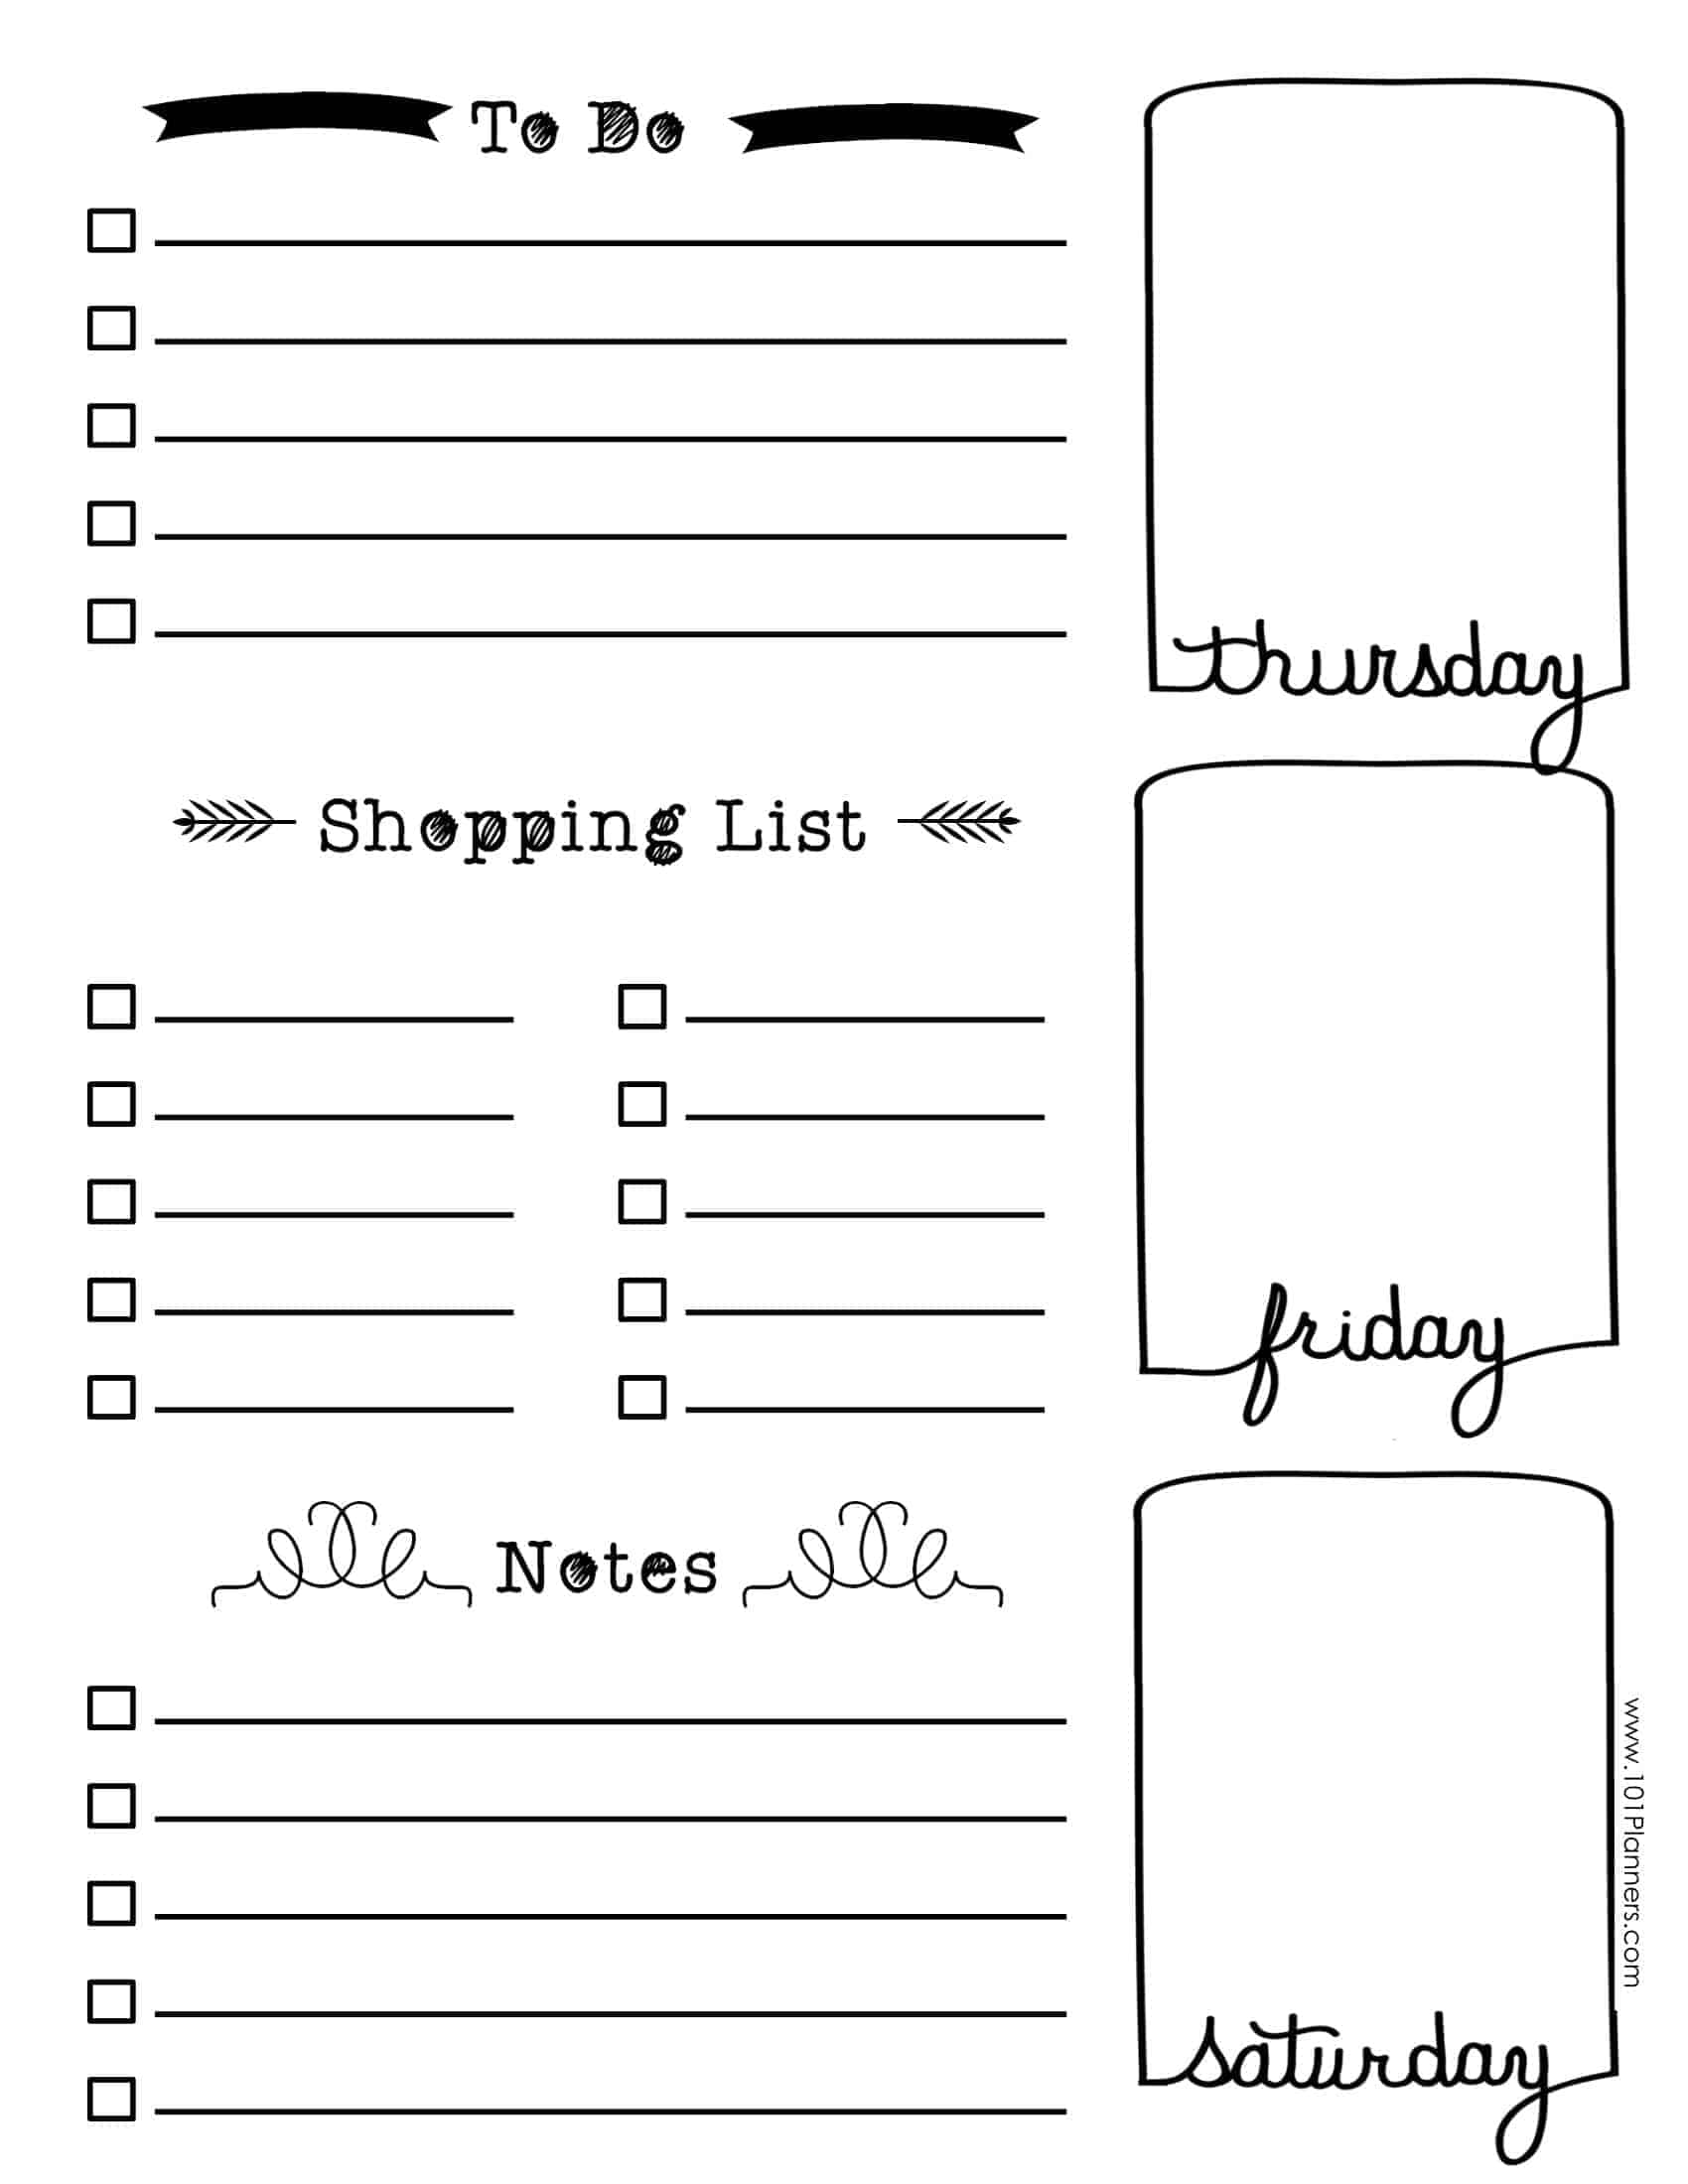 free-template-daily-planner-daily-planner-daily-planner-template-planner-template